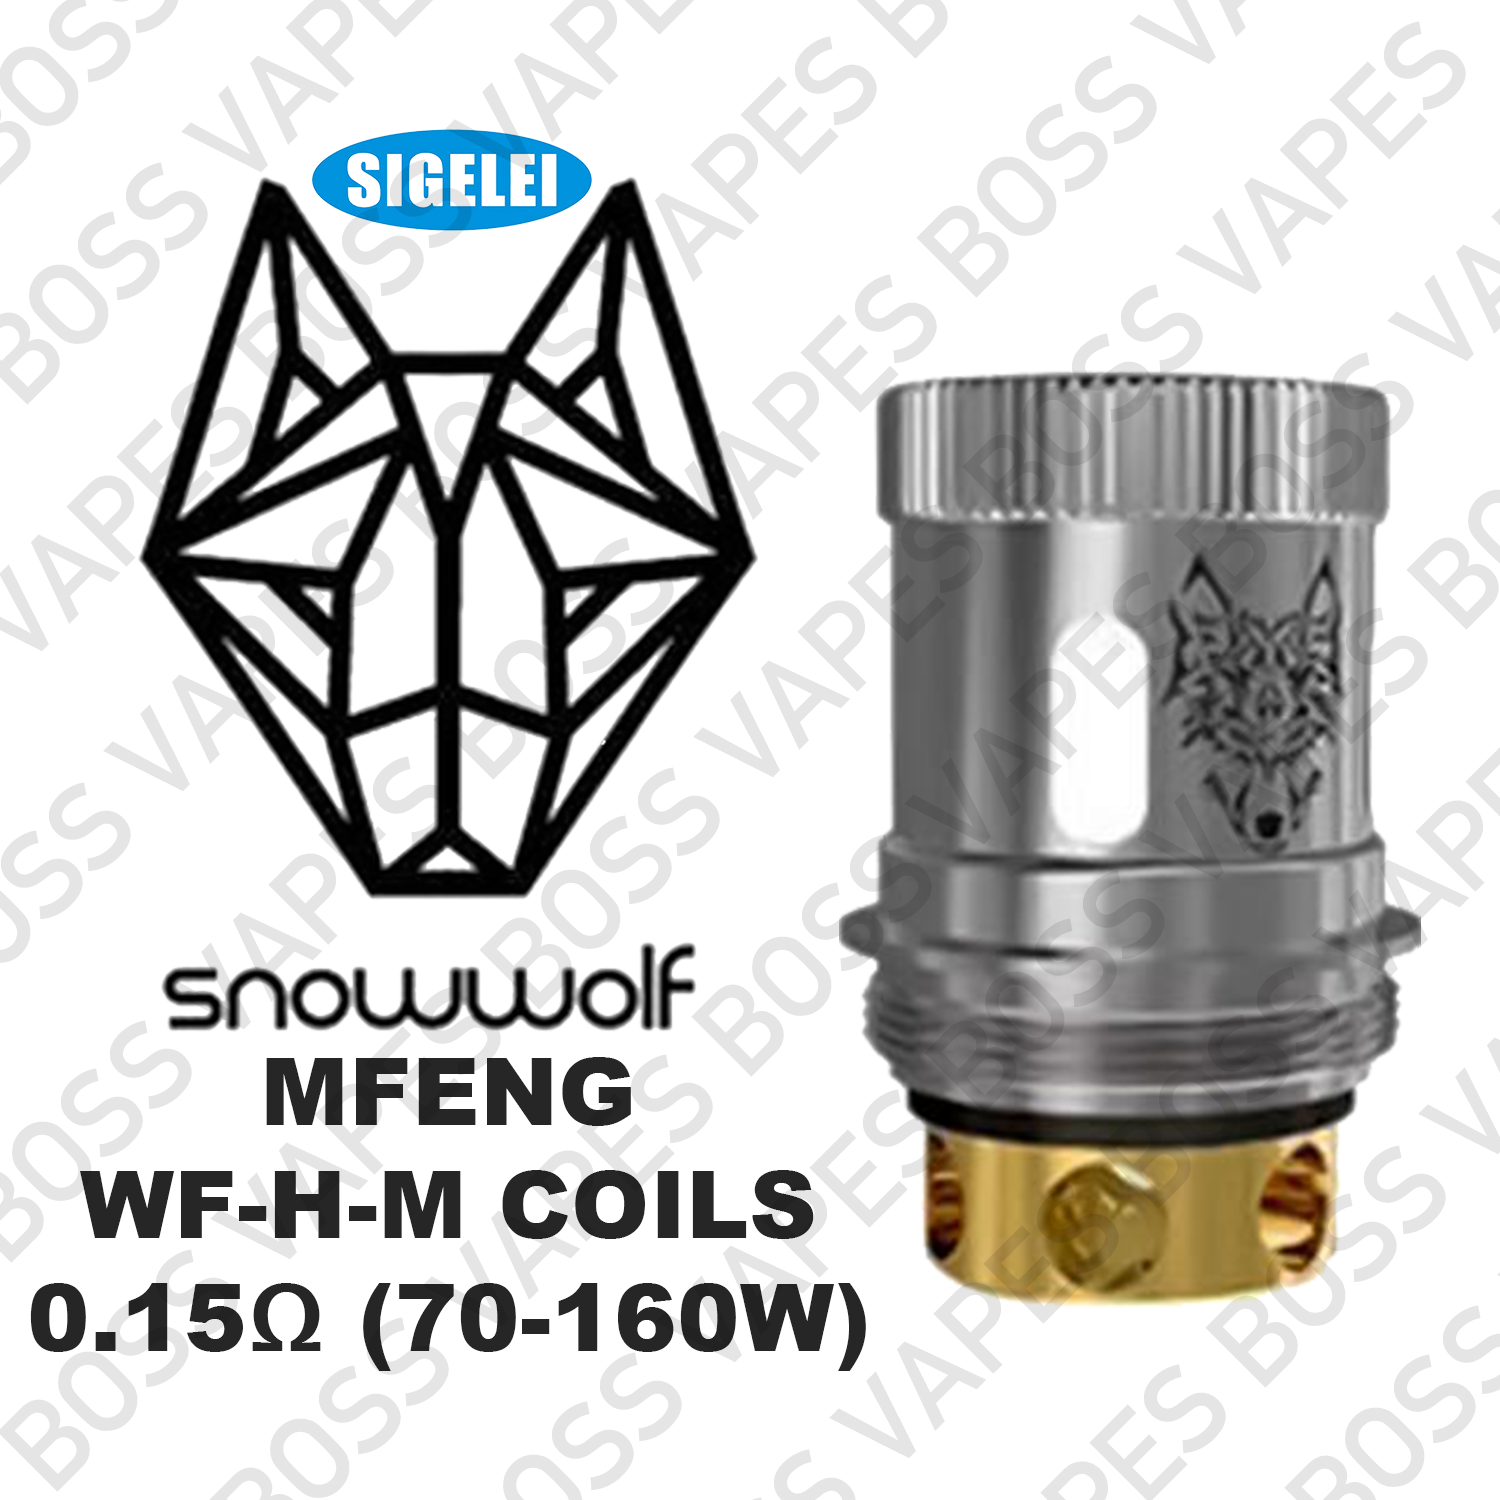 SIGELEI SNOWWOLF MFENG WF REPLACEMENT COILS (Price Per Coil) - Boss Vapes